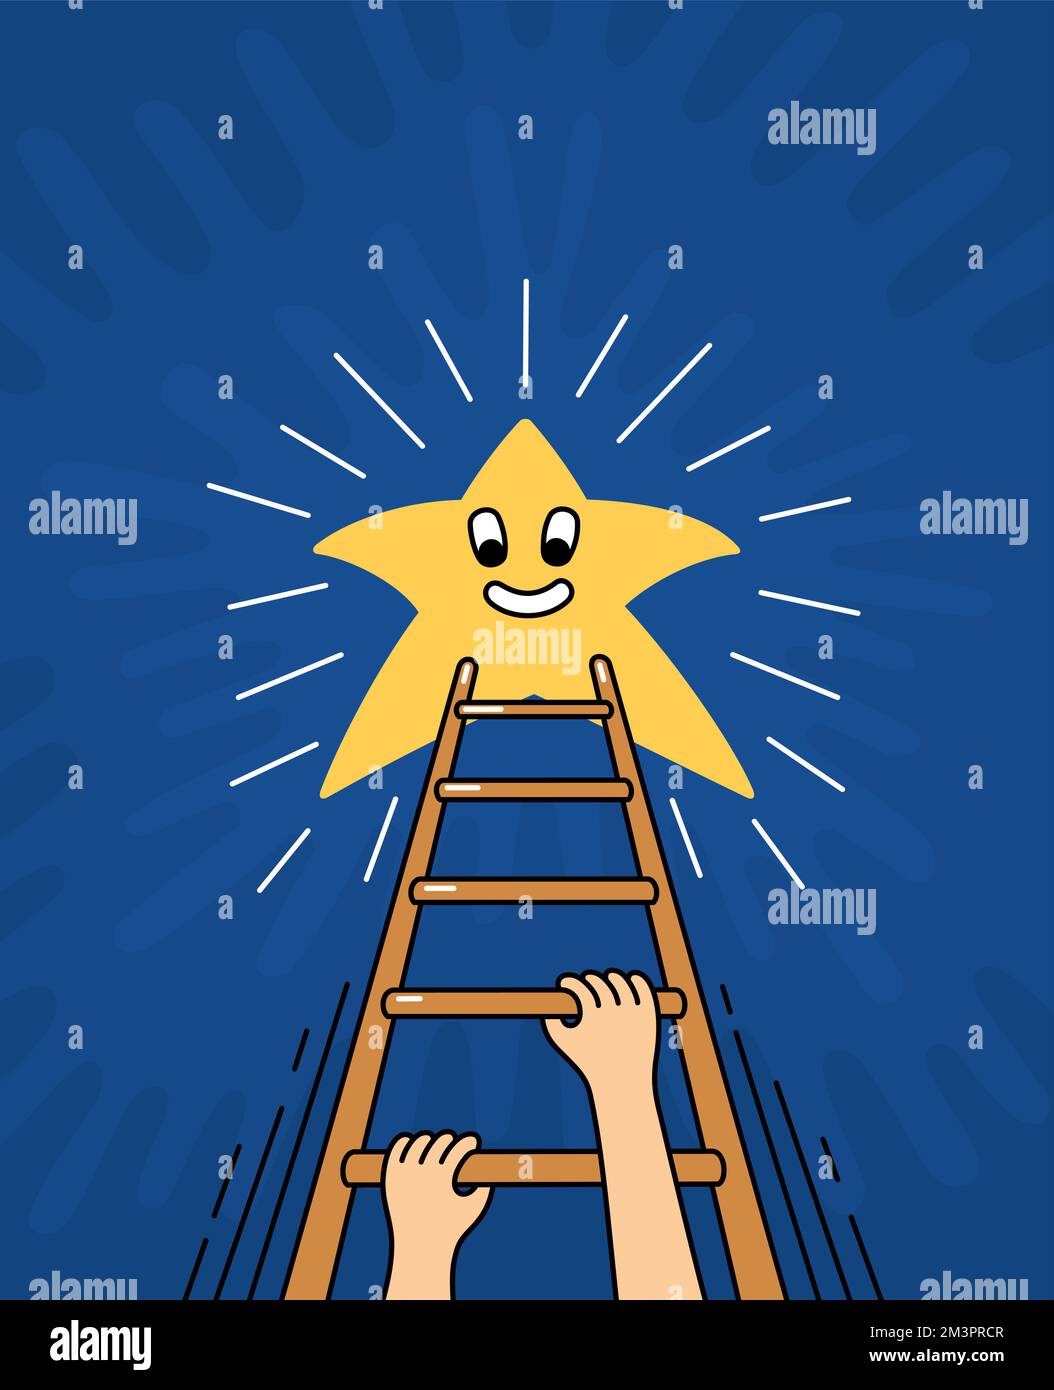 Man follows his dream. Stairway to the star. Groovy style cartoon illustrations. Positive motivational poster. Vector graphics Stock Vector